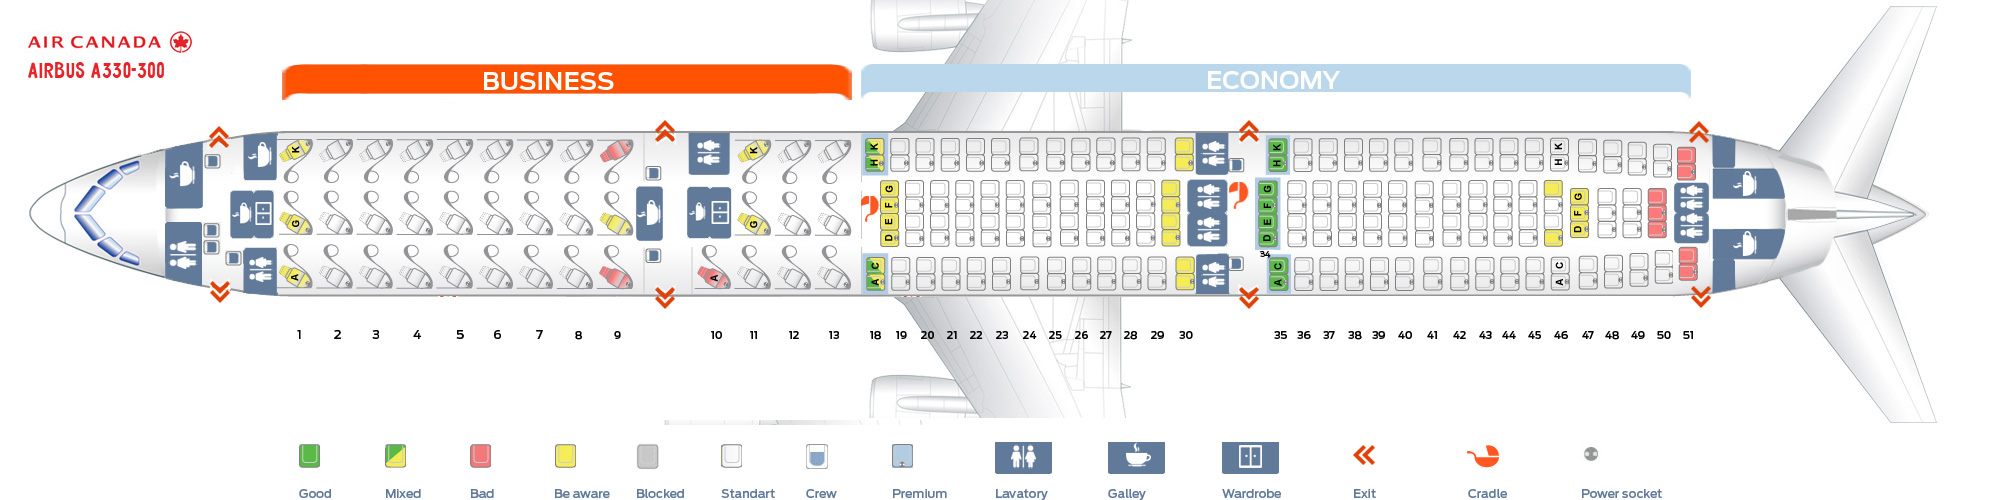 Seat map Airbus A330300 Air Canada. Best seats in plane